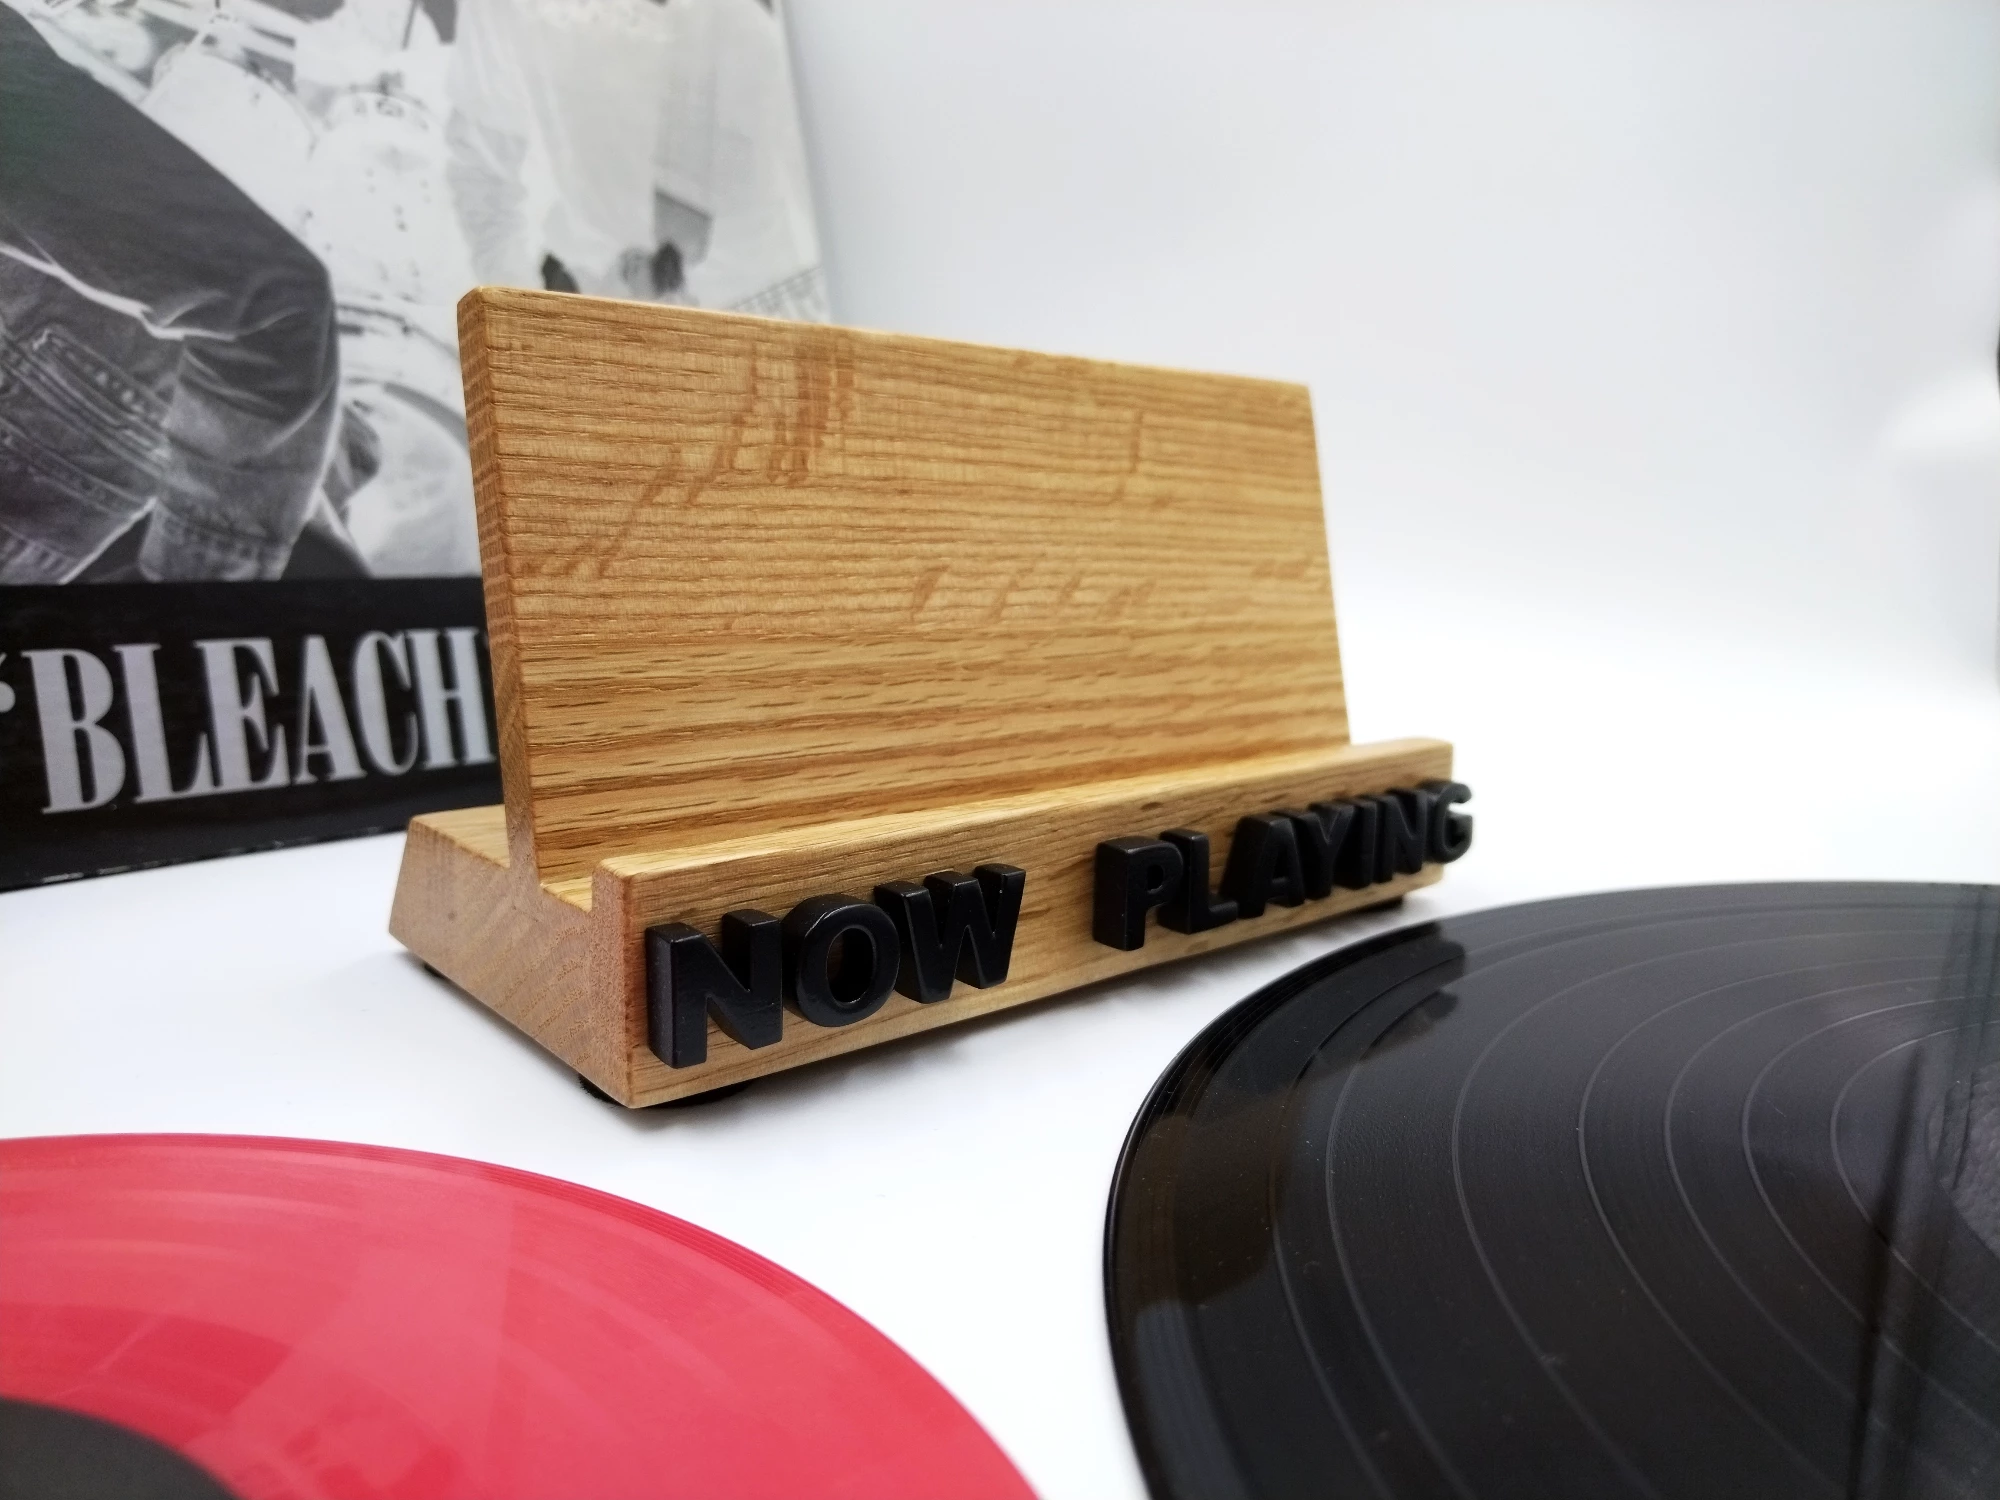 Oak NOW PLAYING vinyl record display stand